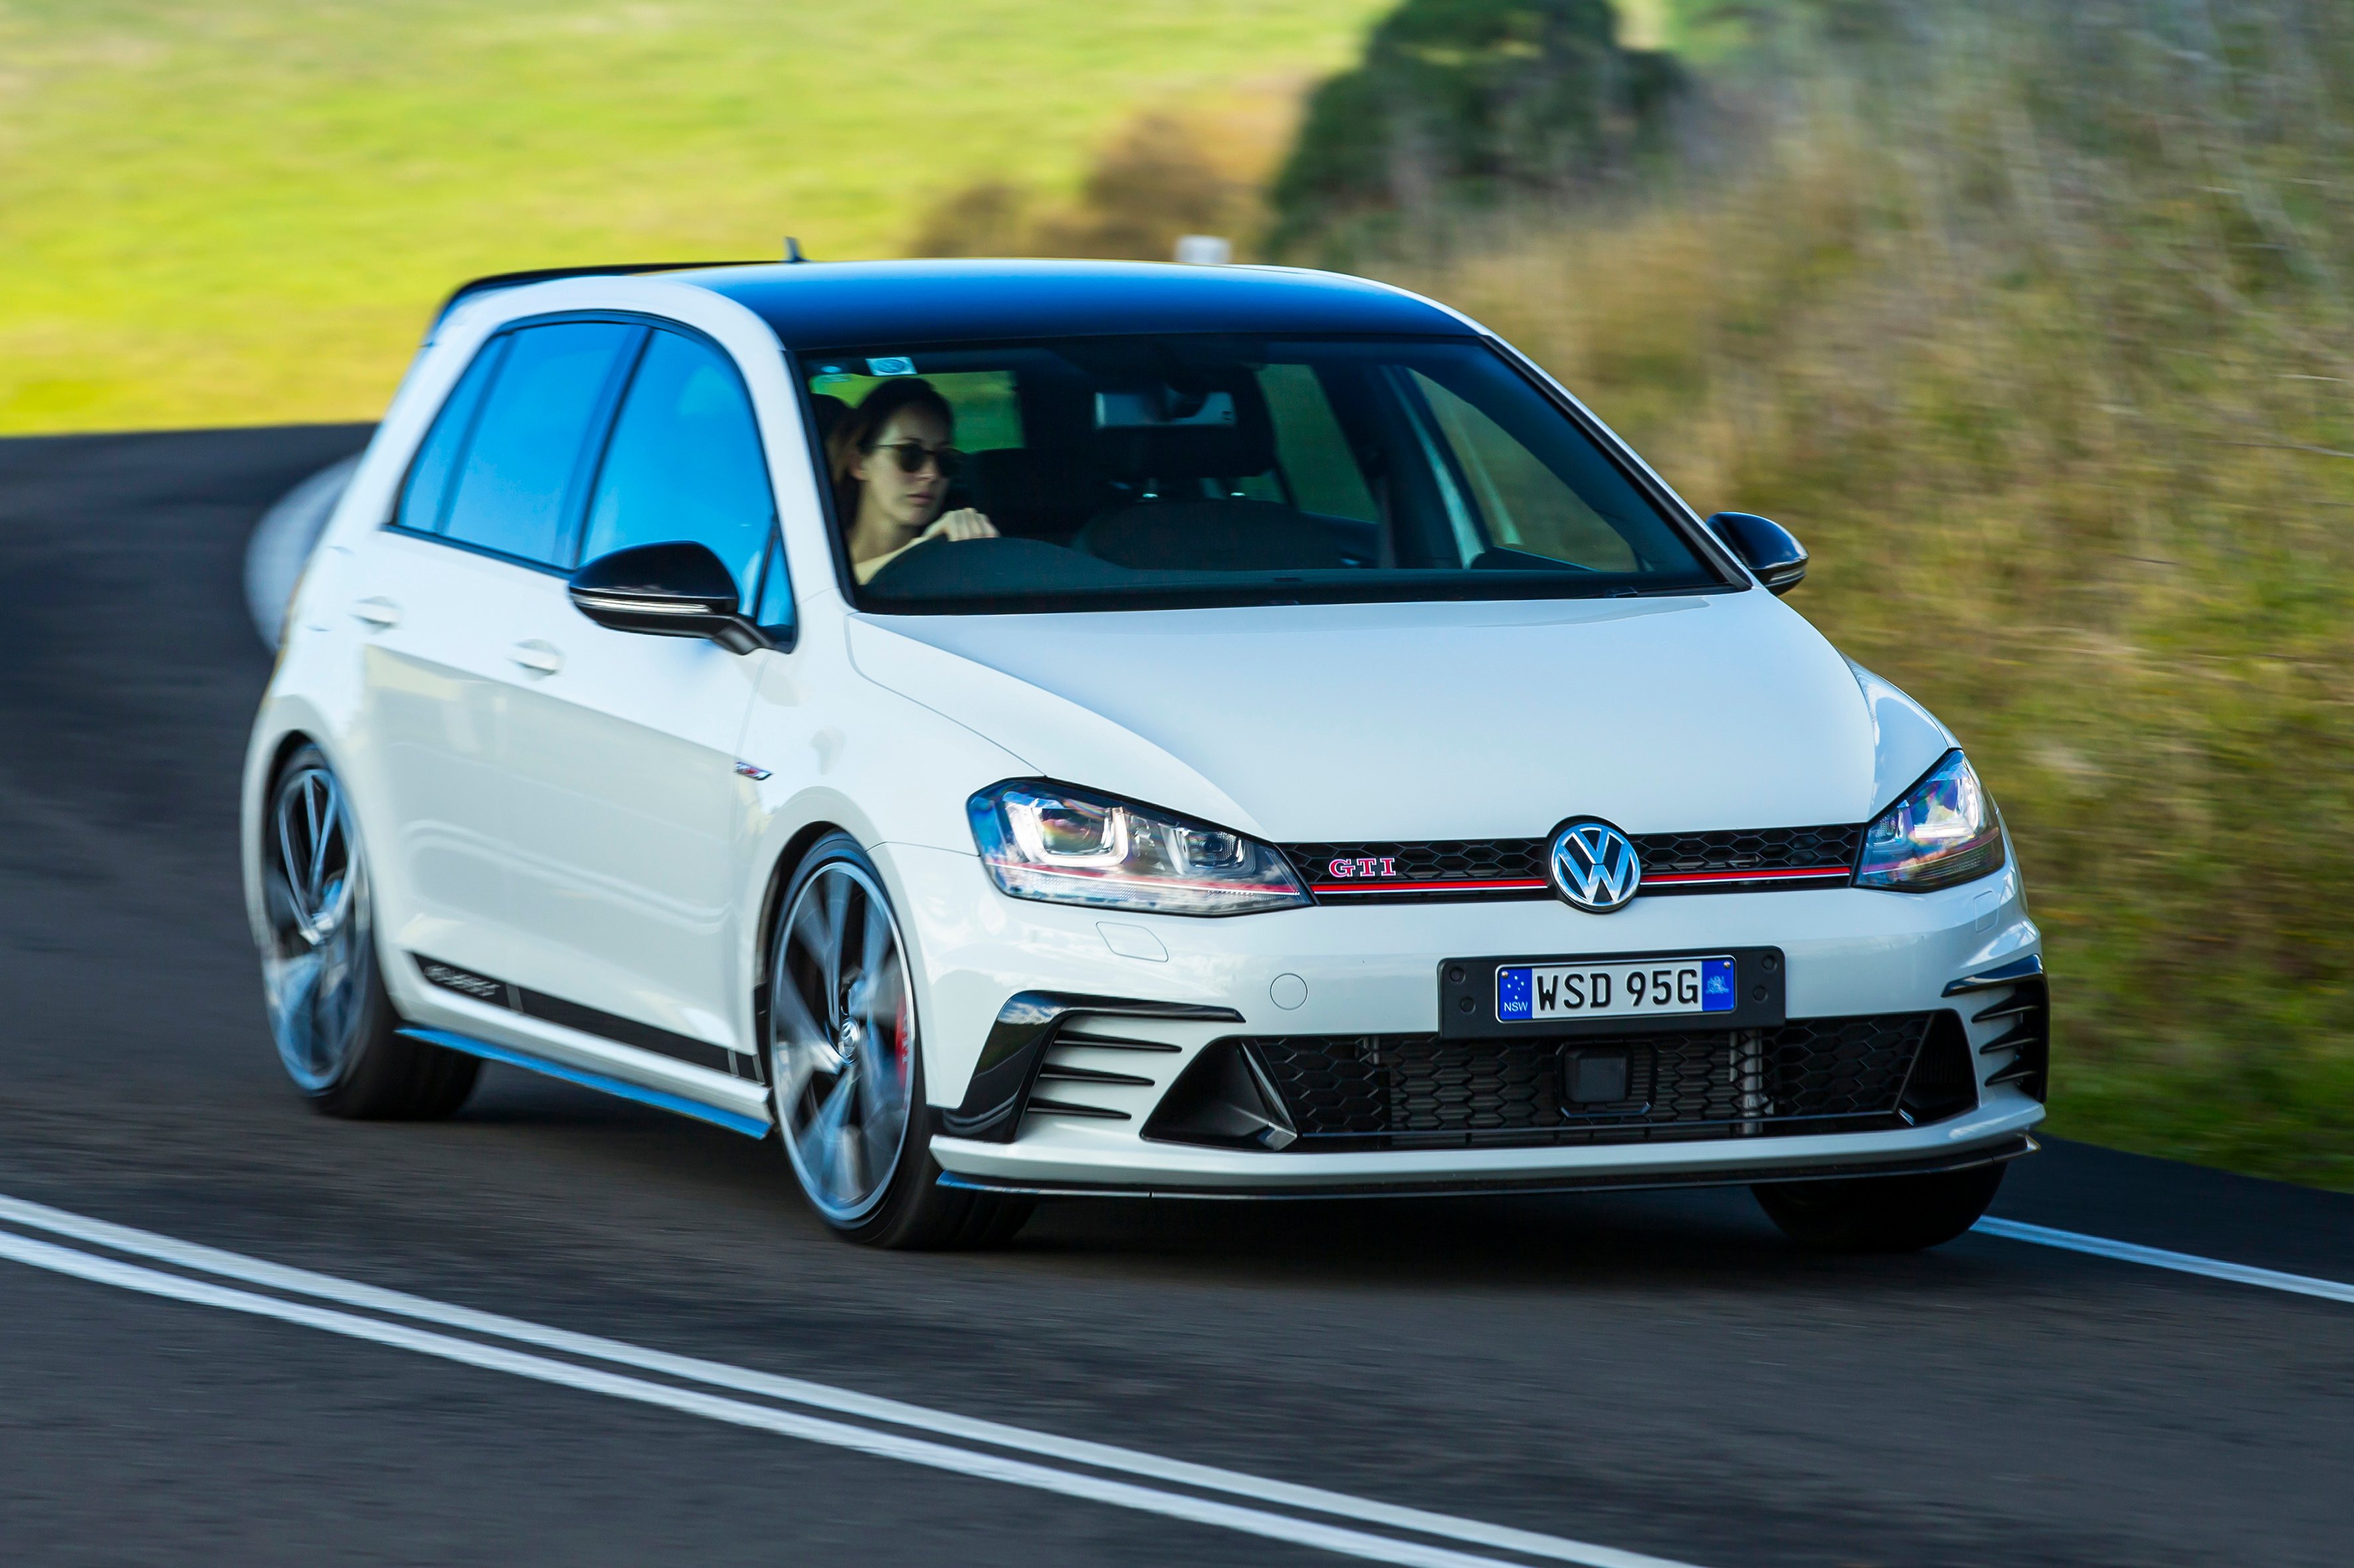 2016 Volkswagen Golf GTI 40 Years Review photos CarAdvice